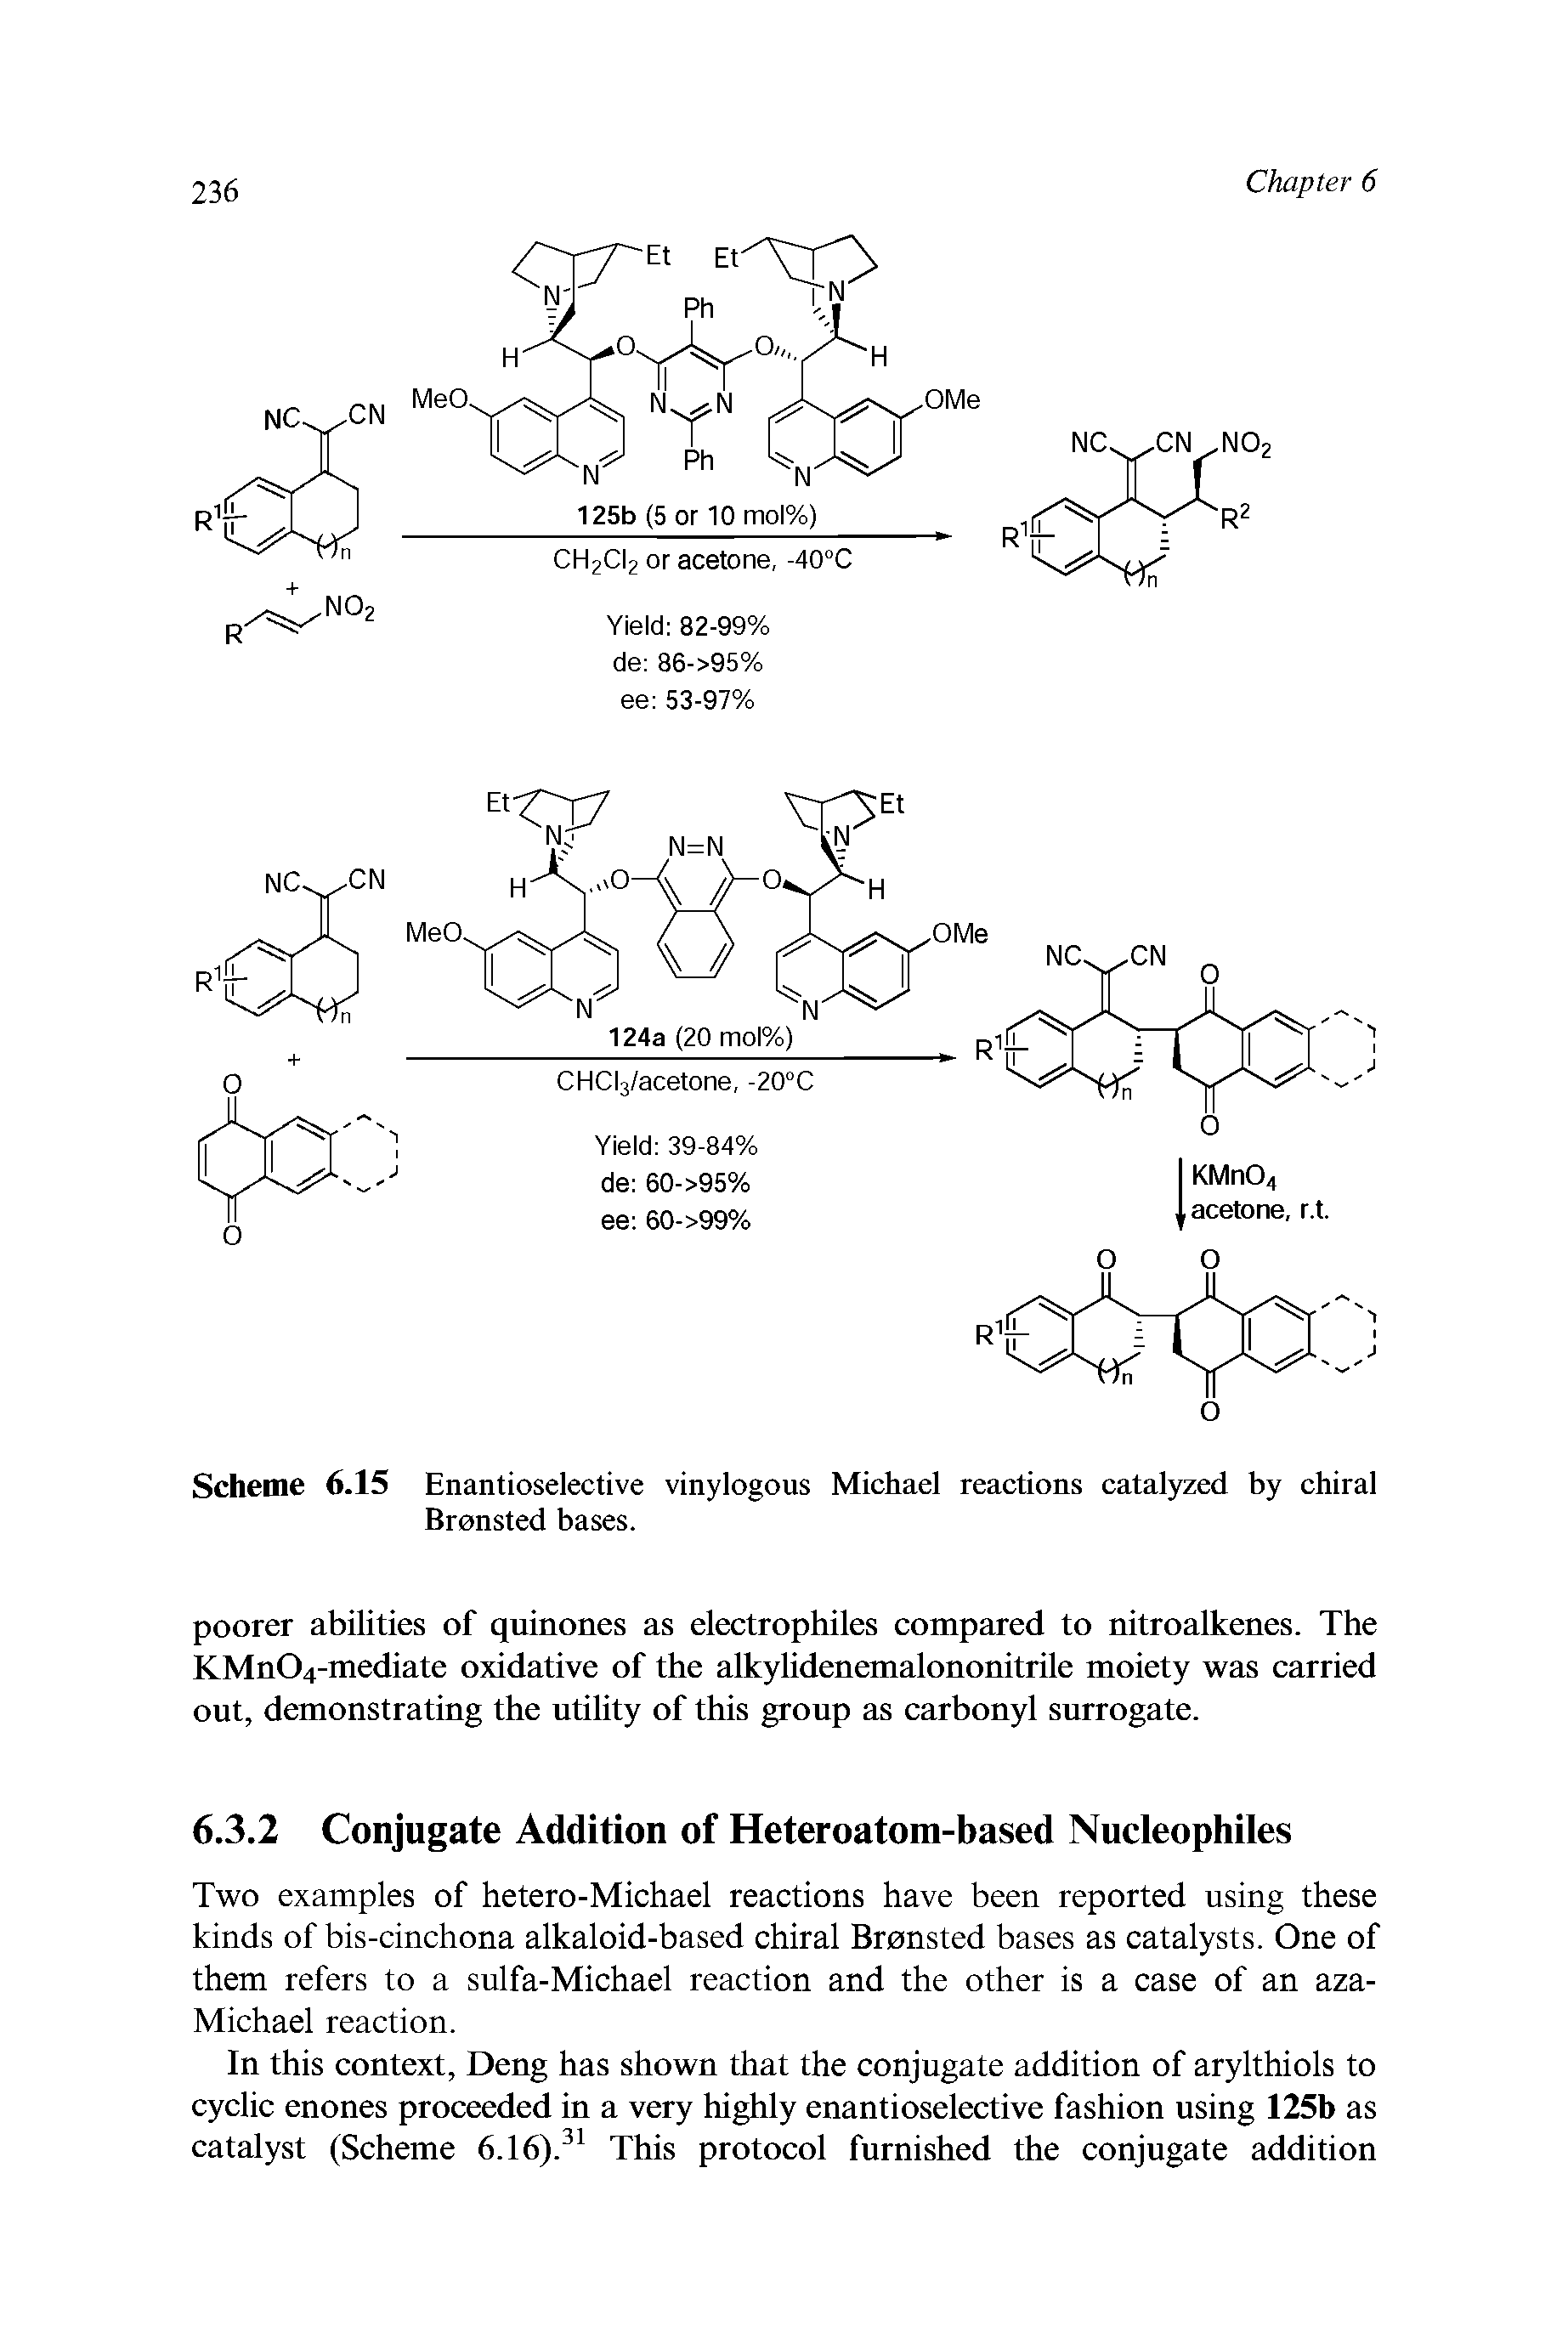 Scheme 6.15 Enantioselective vinylogous Michael reactions catalyzed by chiral Bronsted bases.